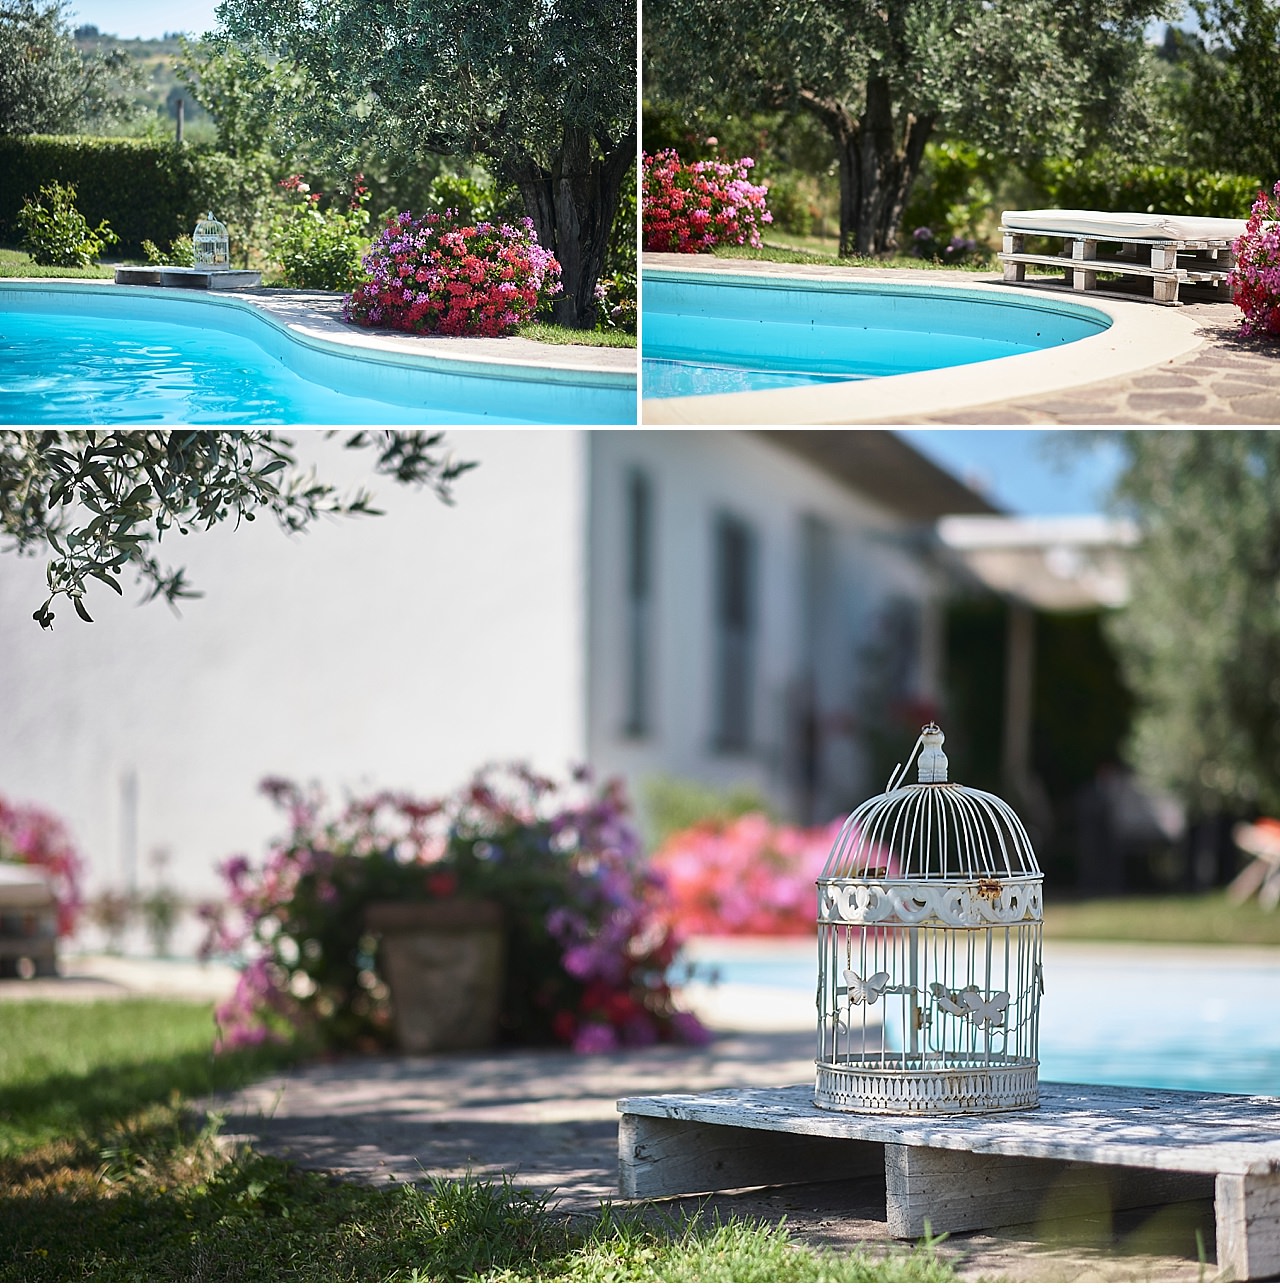  In the middle of the Florentine Chianti hills, in Tavarnelle Val di Pesa, there is the olive grove, a charming property in the middle of the olive trees and with a 360 ° view on barberino and certaldo. interiors furnished in an elegant and modern, v